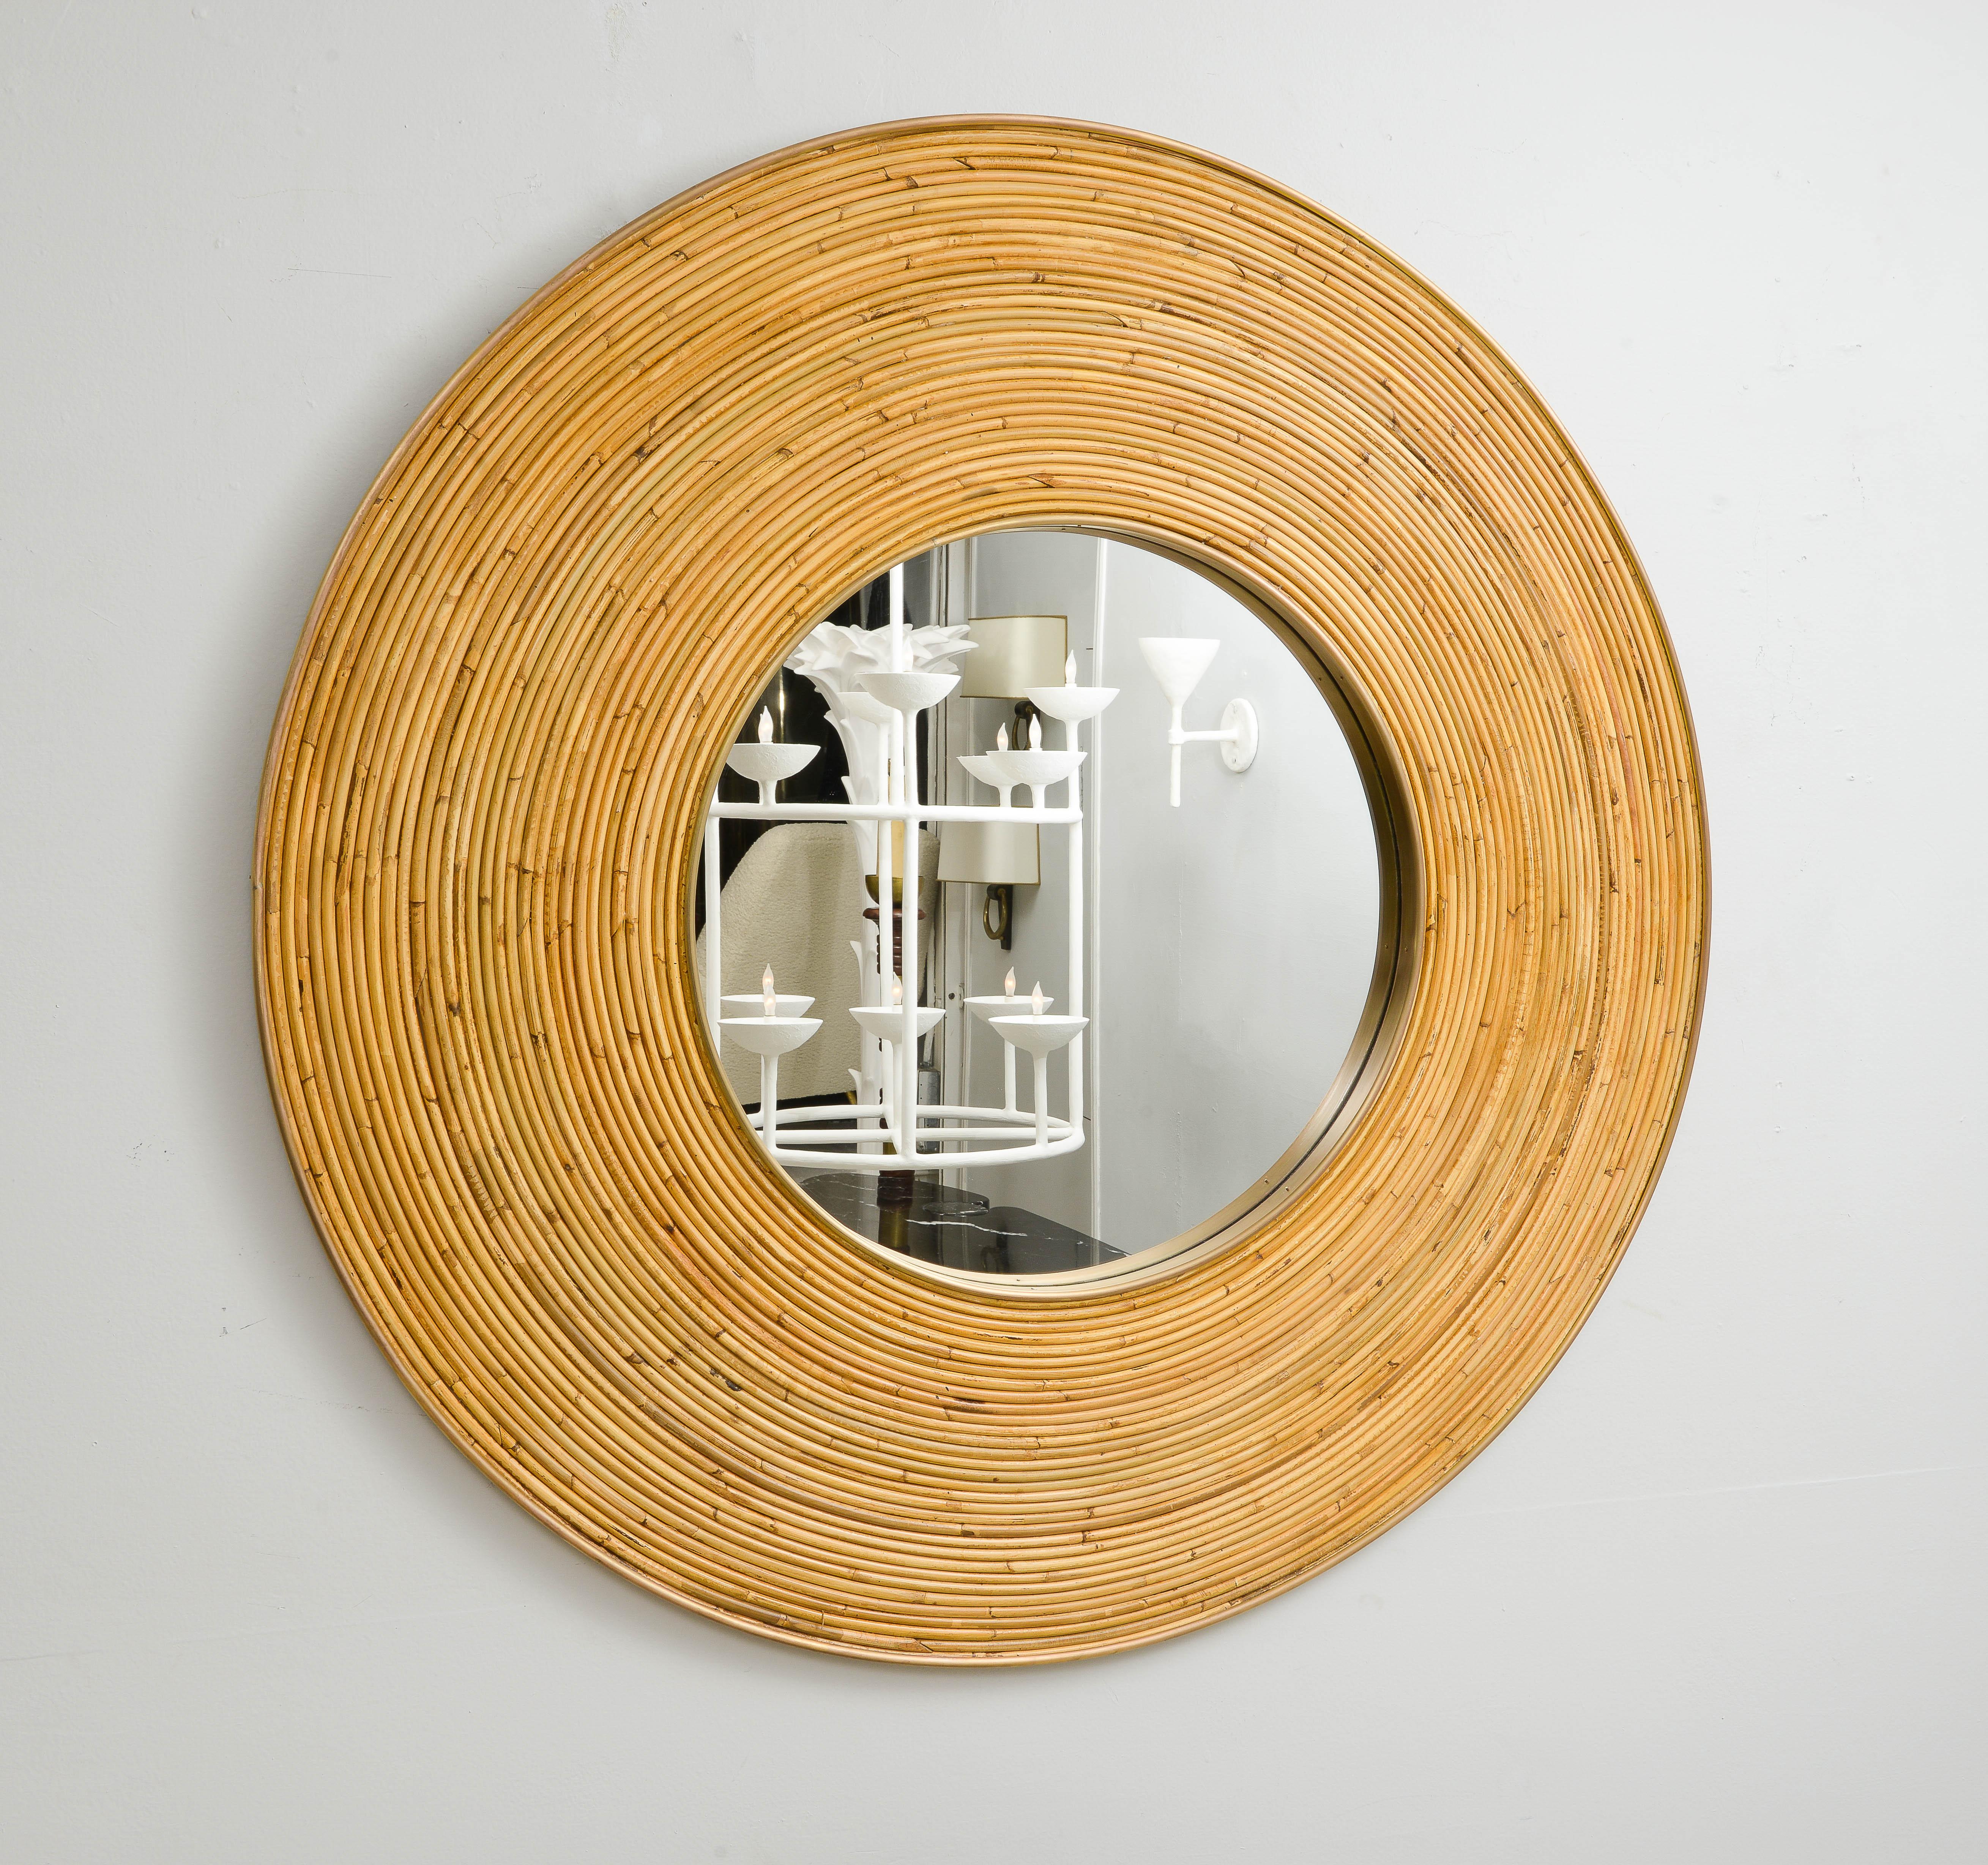 Contemporary Italian Circular Rattan Mirror
One mirror is currently available.